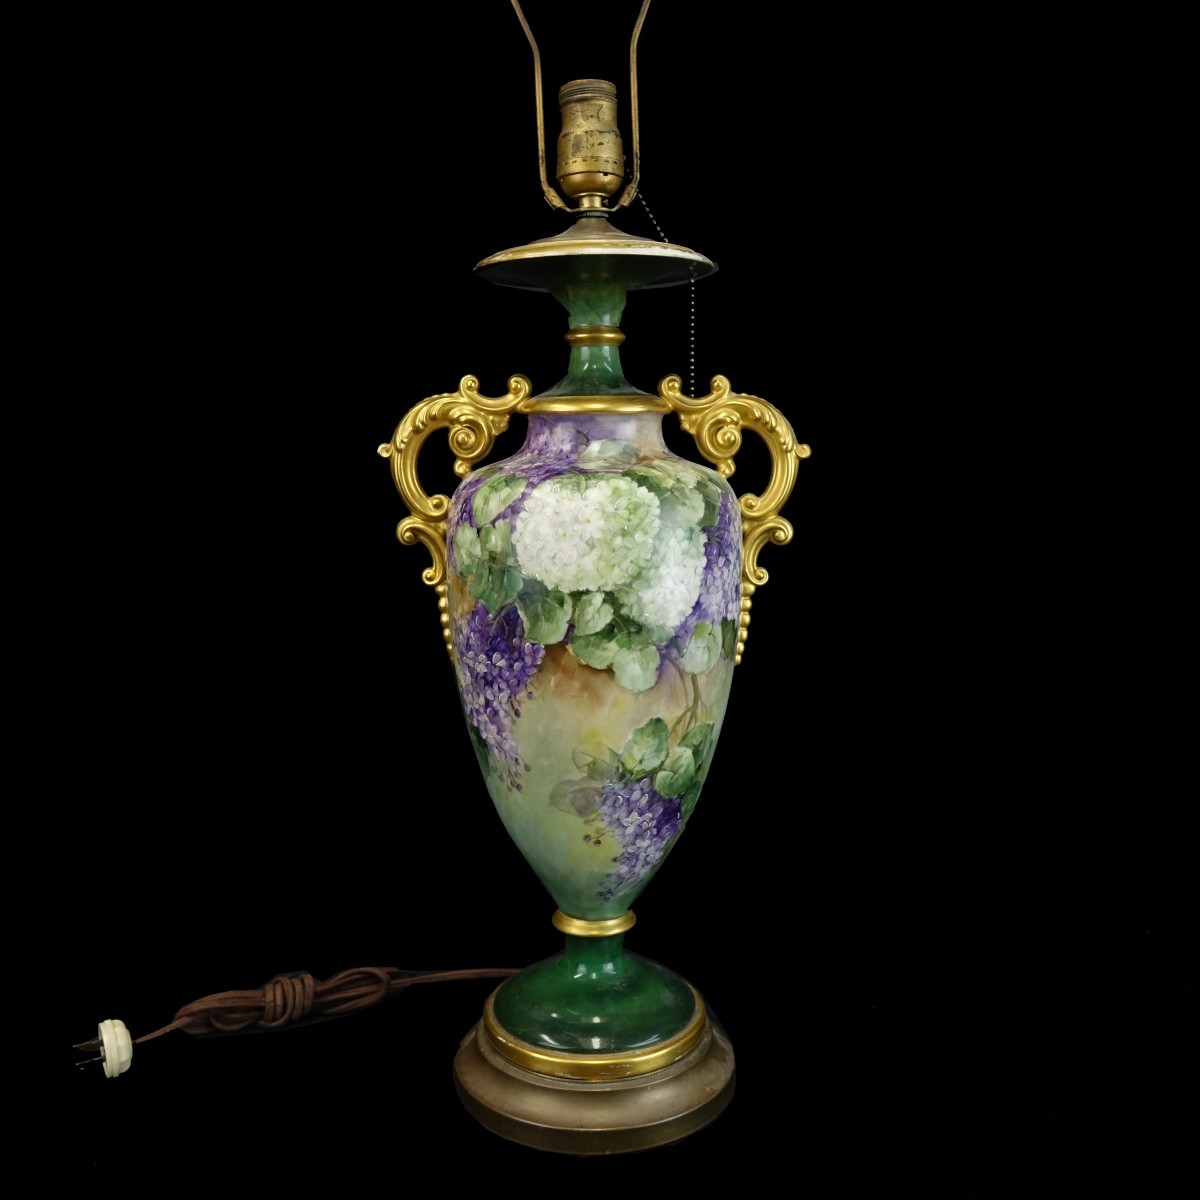 Limoges Urn Mounted as a Lamp